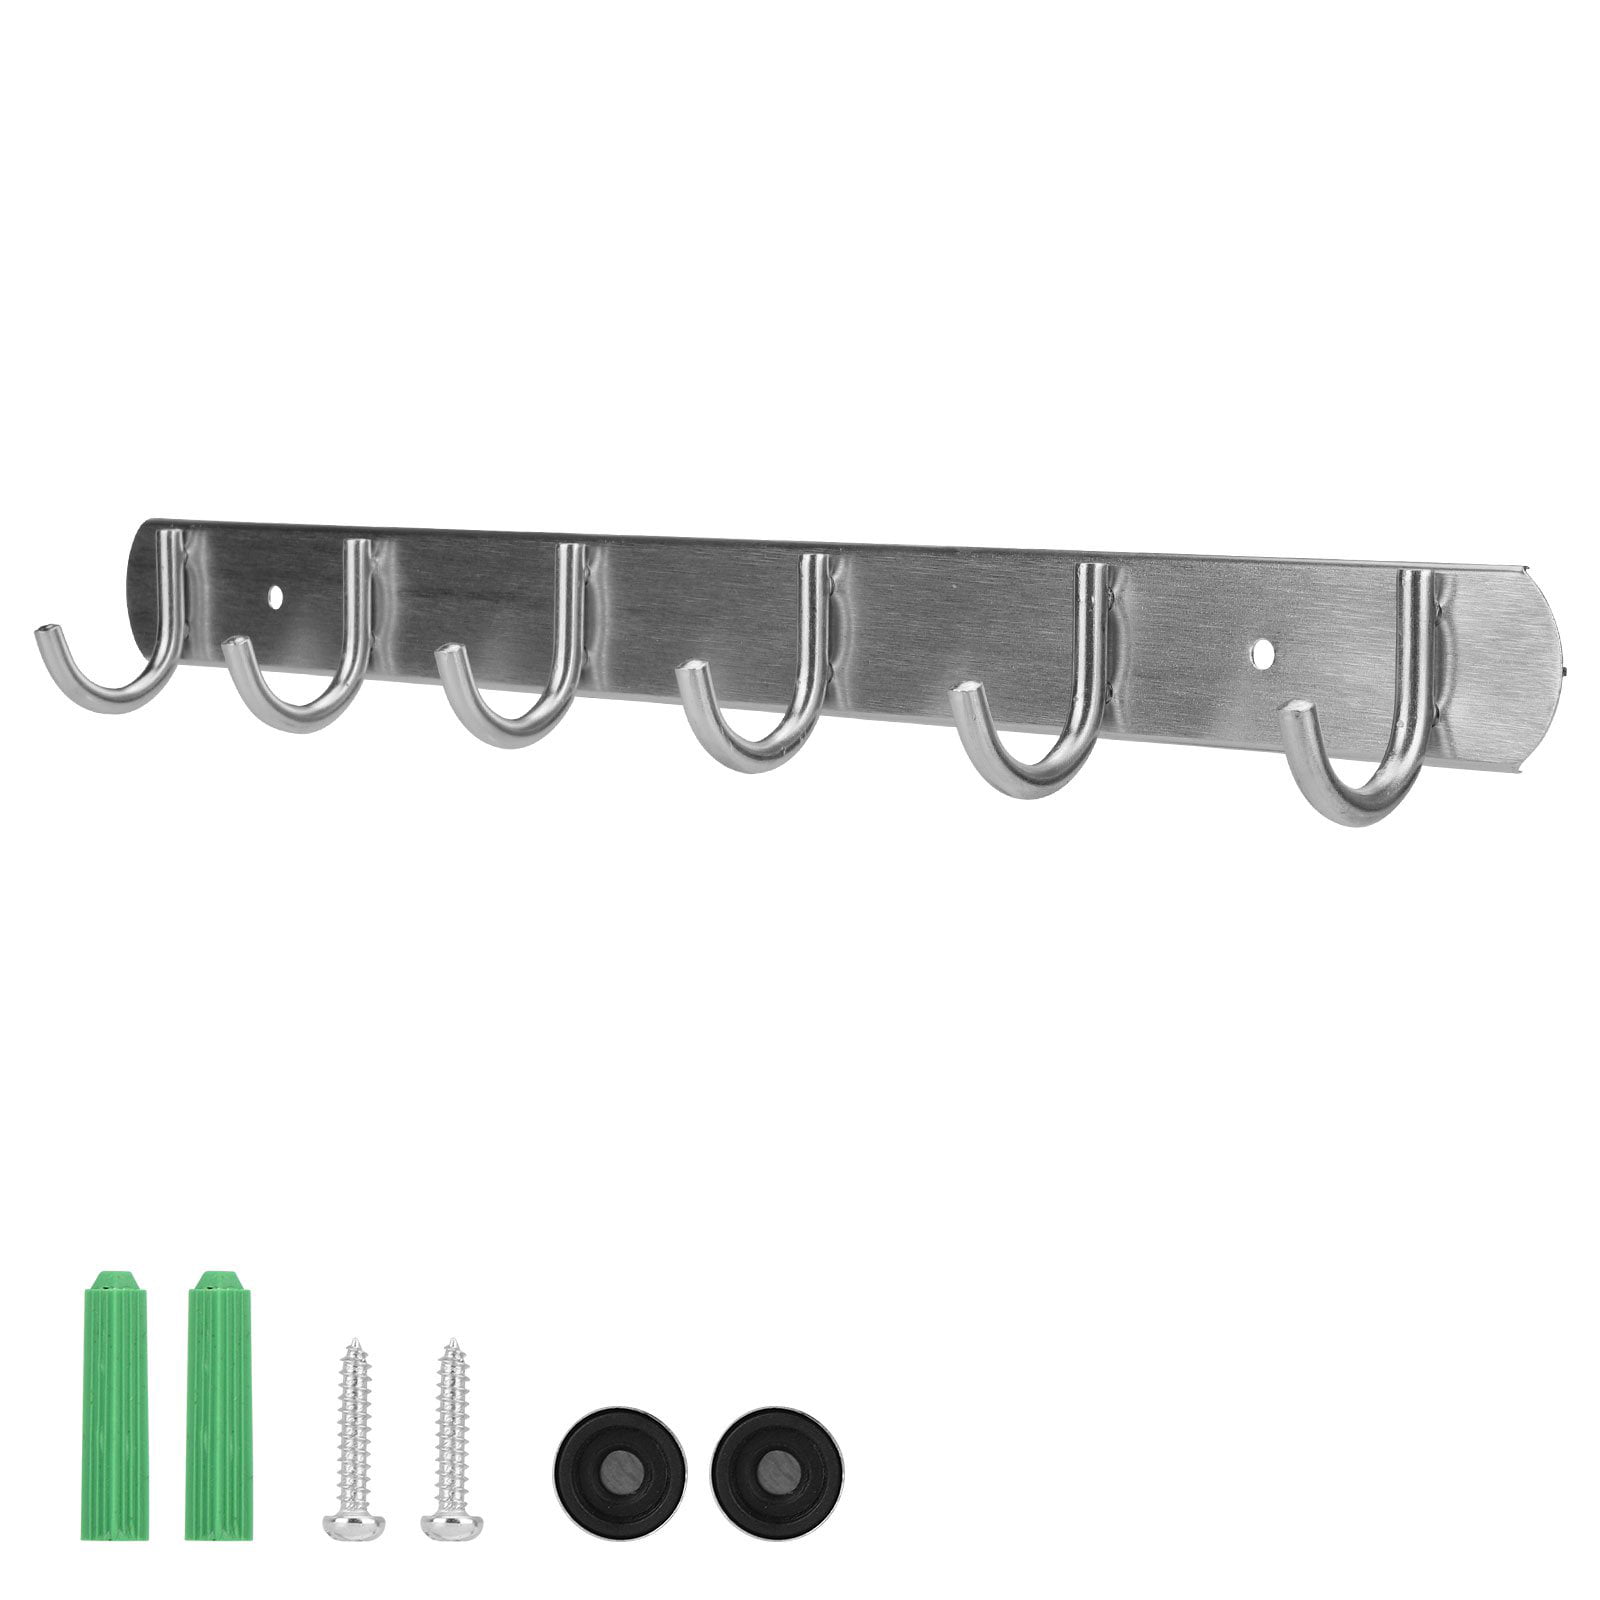 Brushed Nickel & Chrome Wall Hung Mount 6 Hook Hat and Coat Rack Organizer